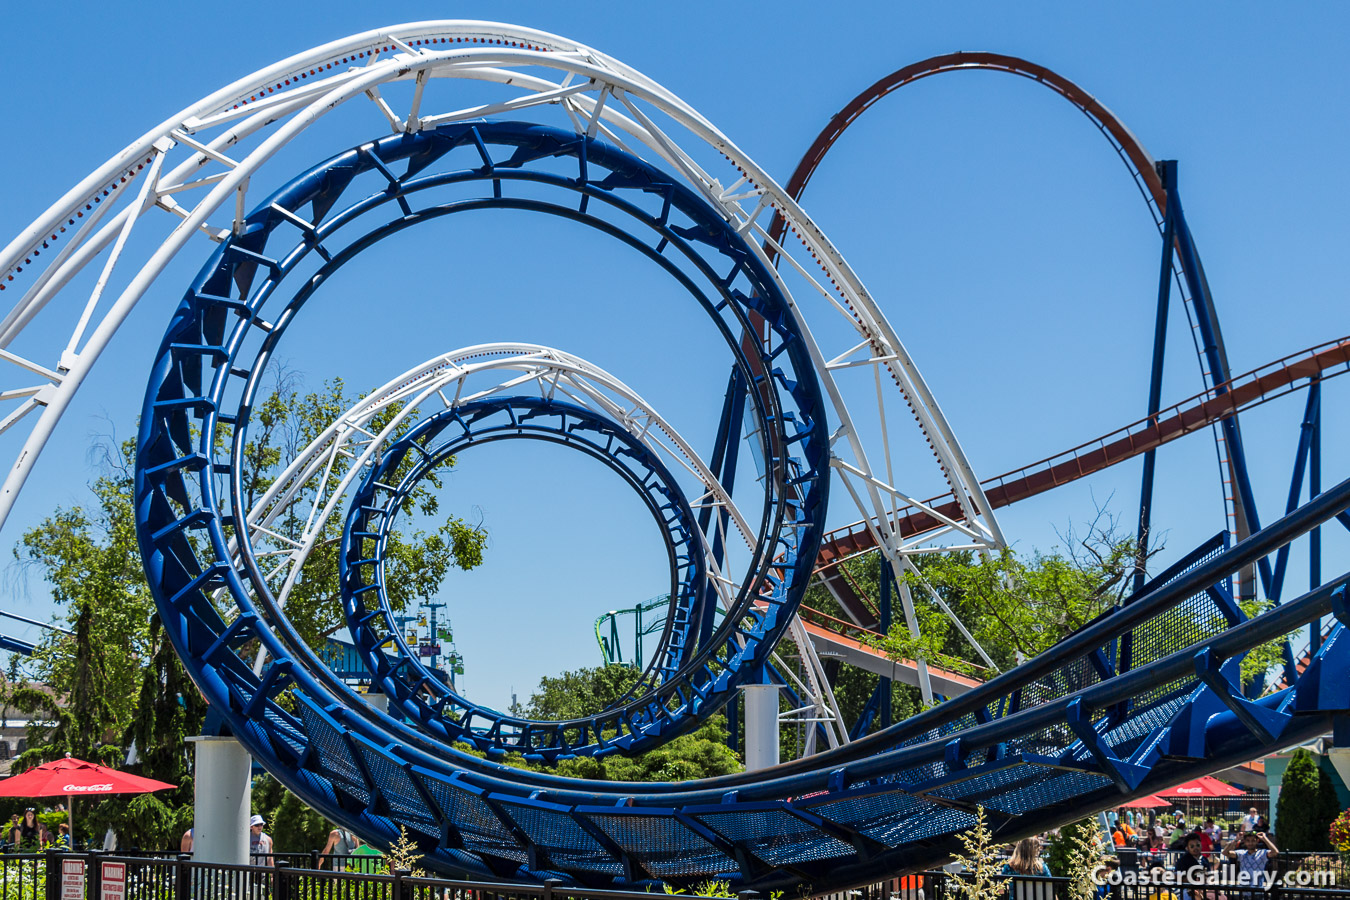 How much does a roller coaster cost? This one was over $7 million!